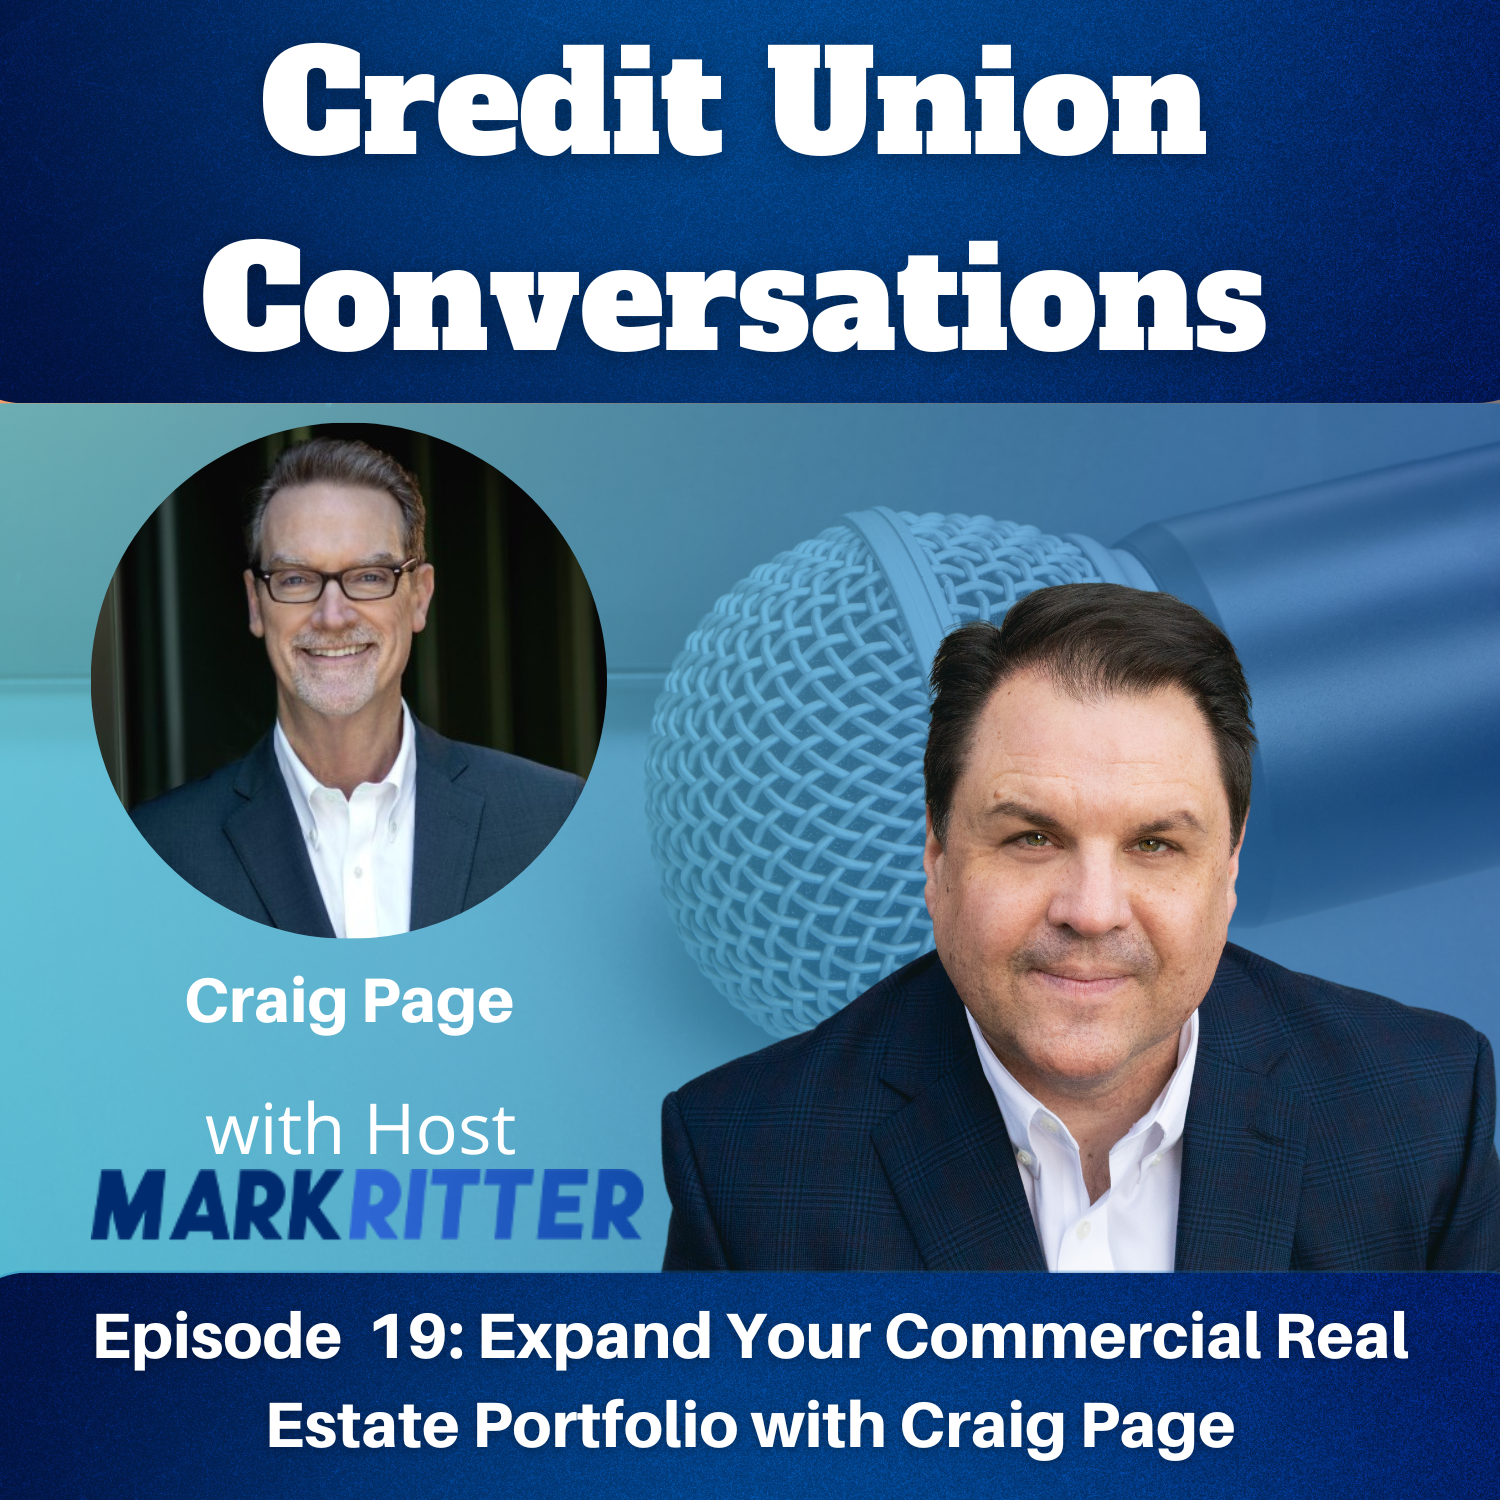 Expand Your Commercial Real Estate Portfolio with Craig Page